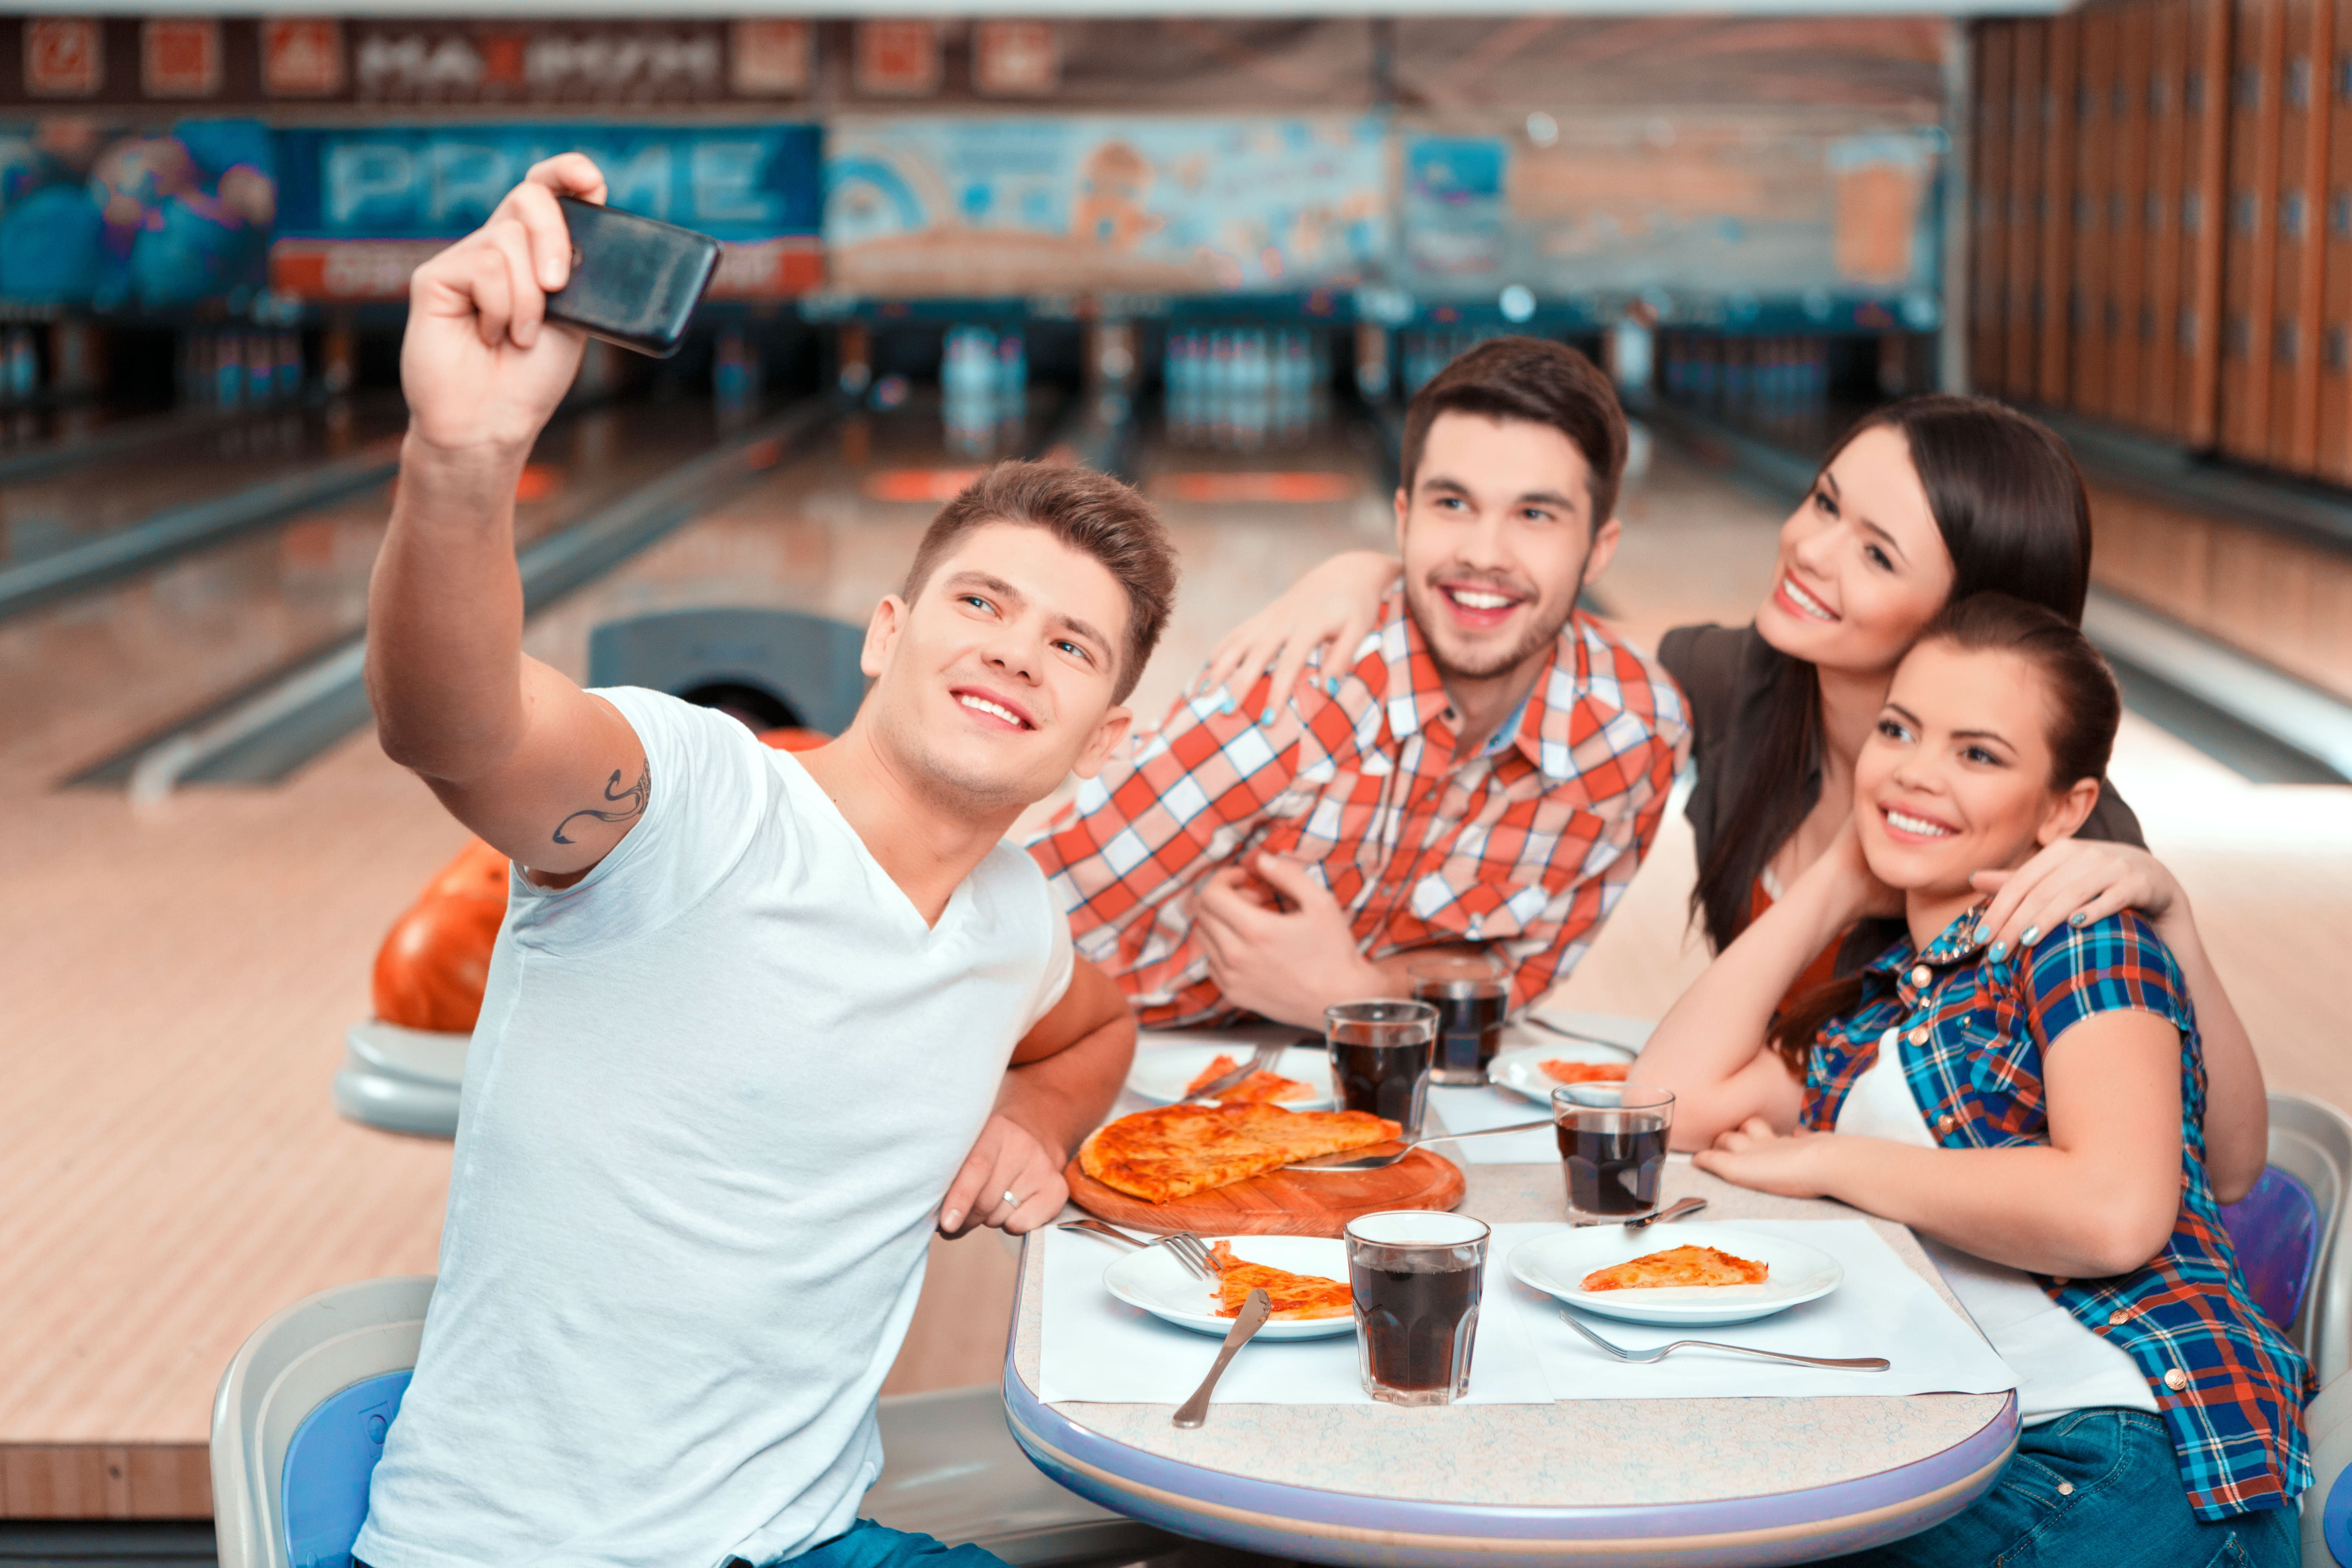 pizza and bowling special | daily deals | bowling specials | bowling deals | odyssey fun center | sheboygan, wi